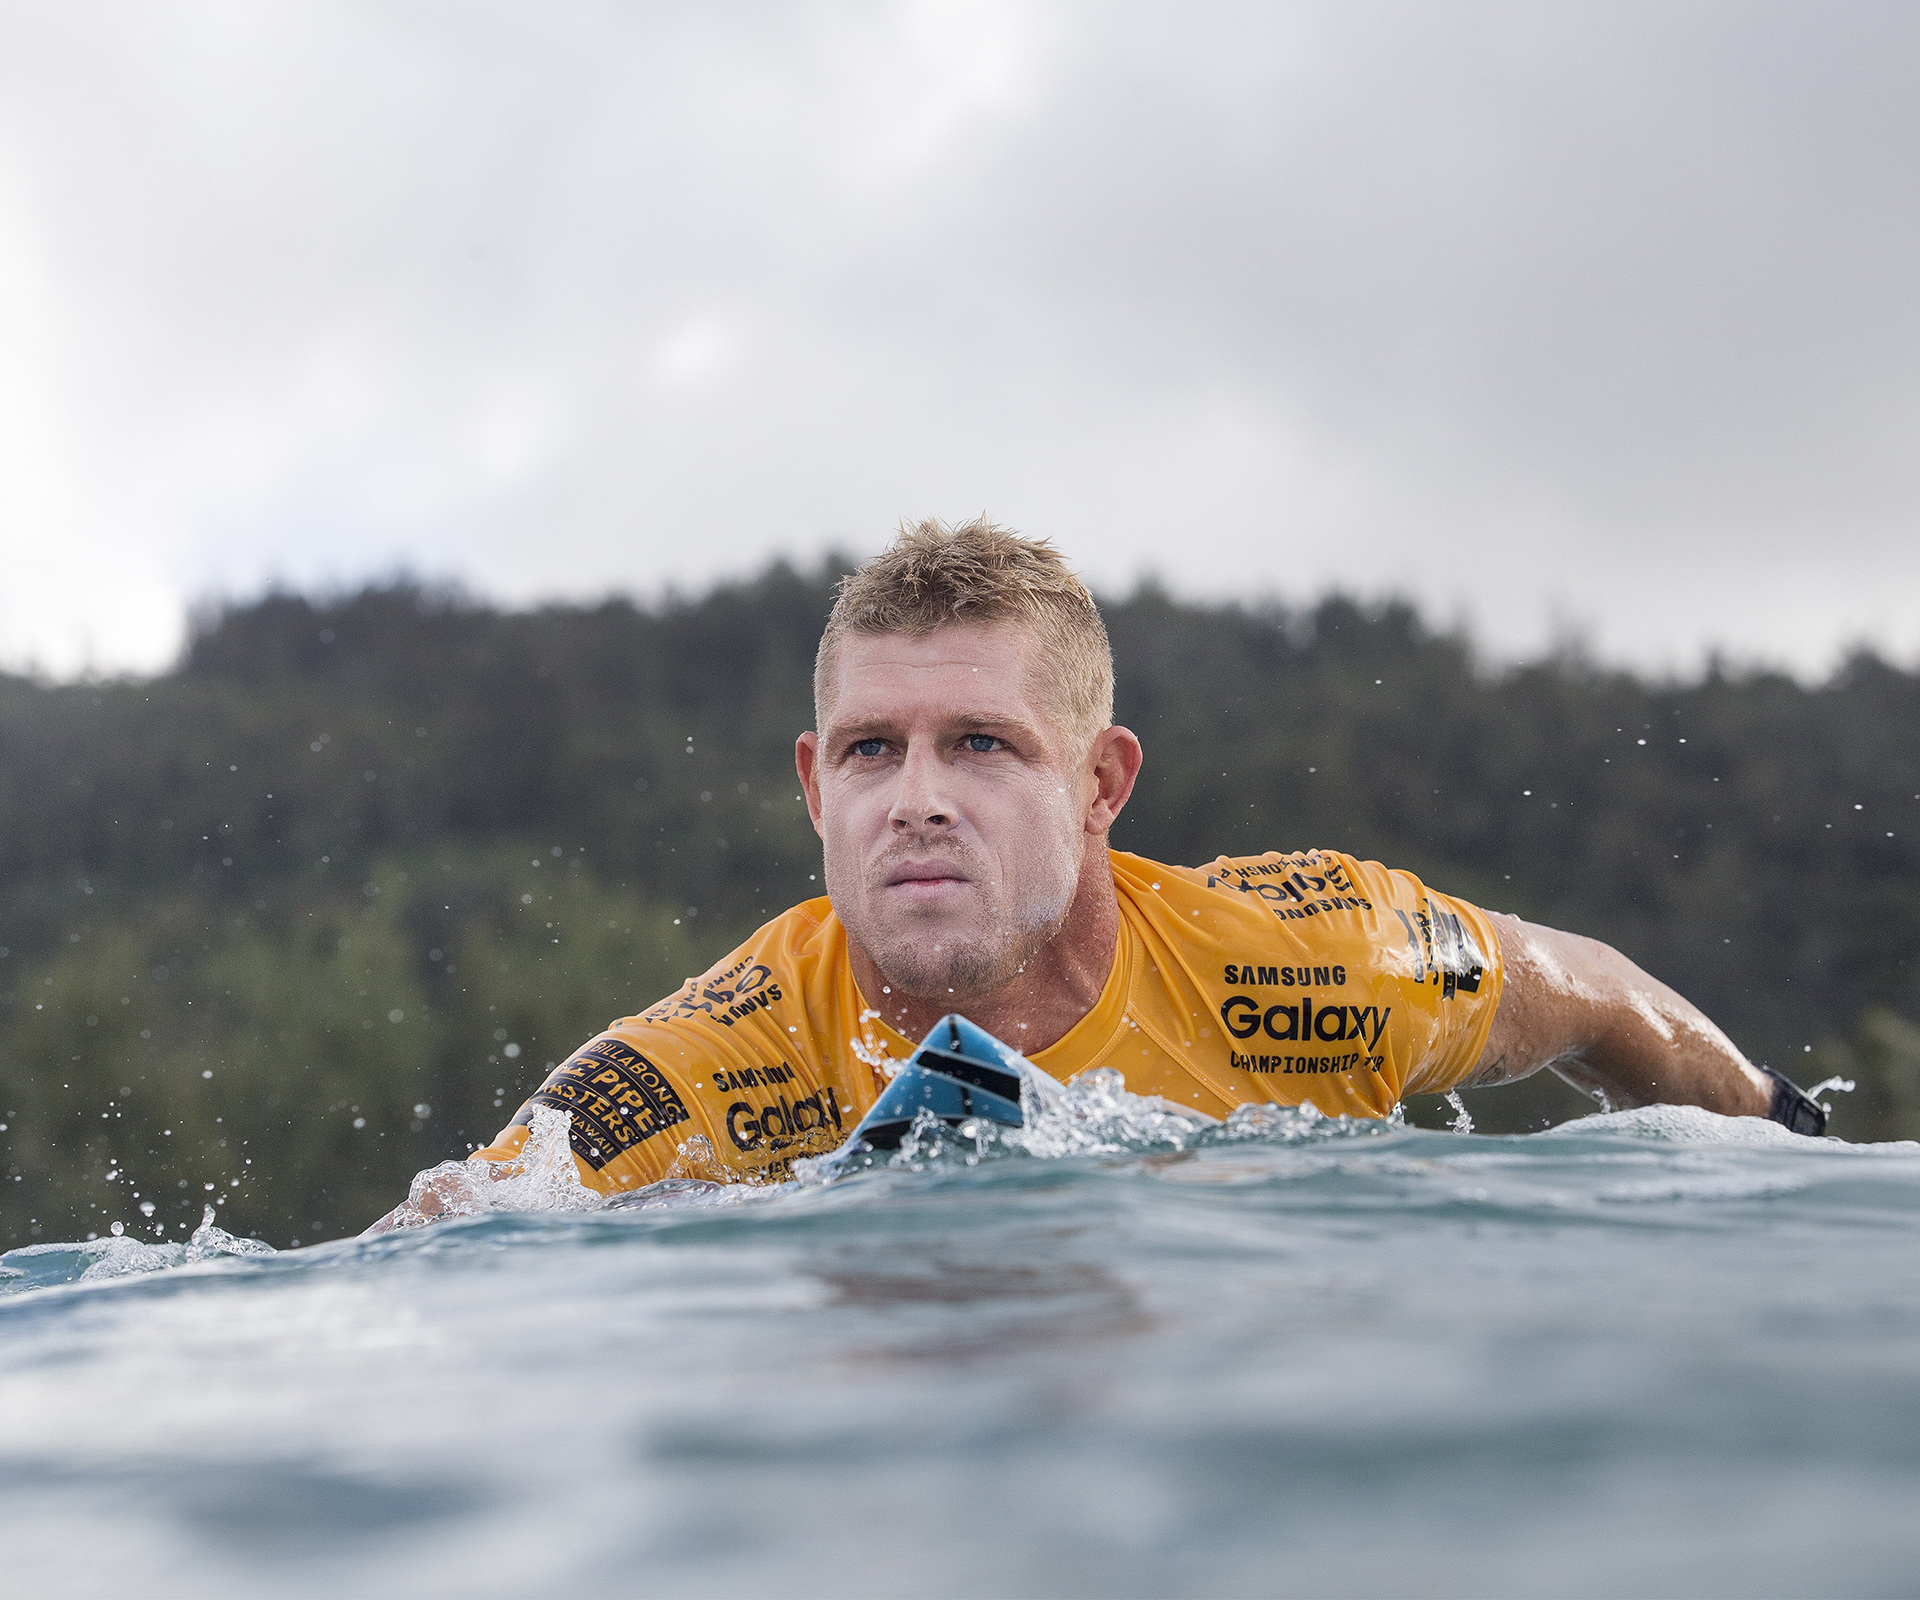 Mick Fanning’s brother passes away hours before world championship